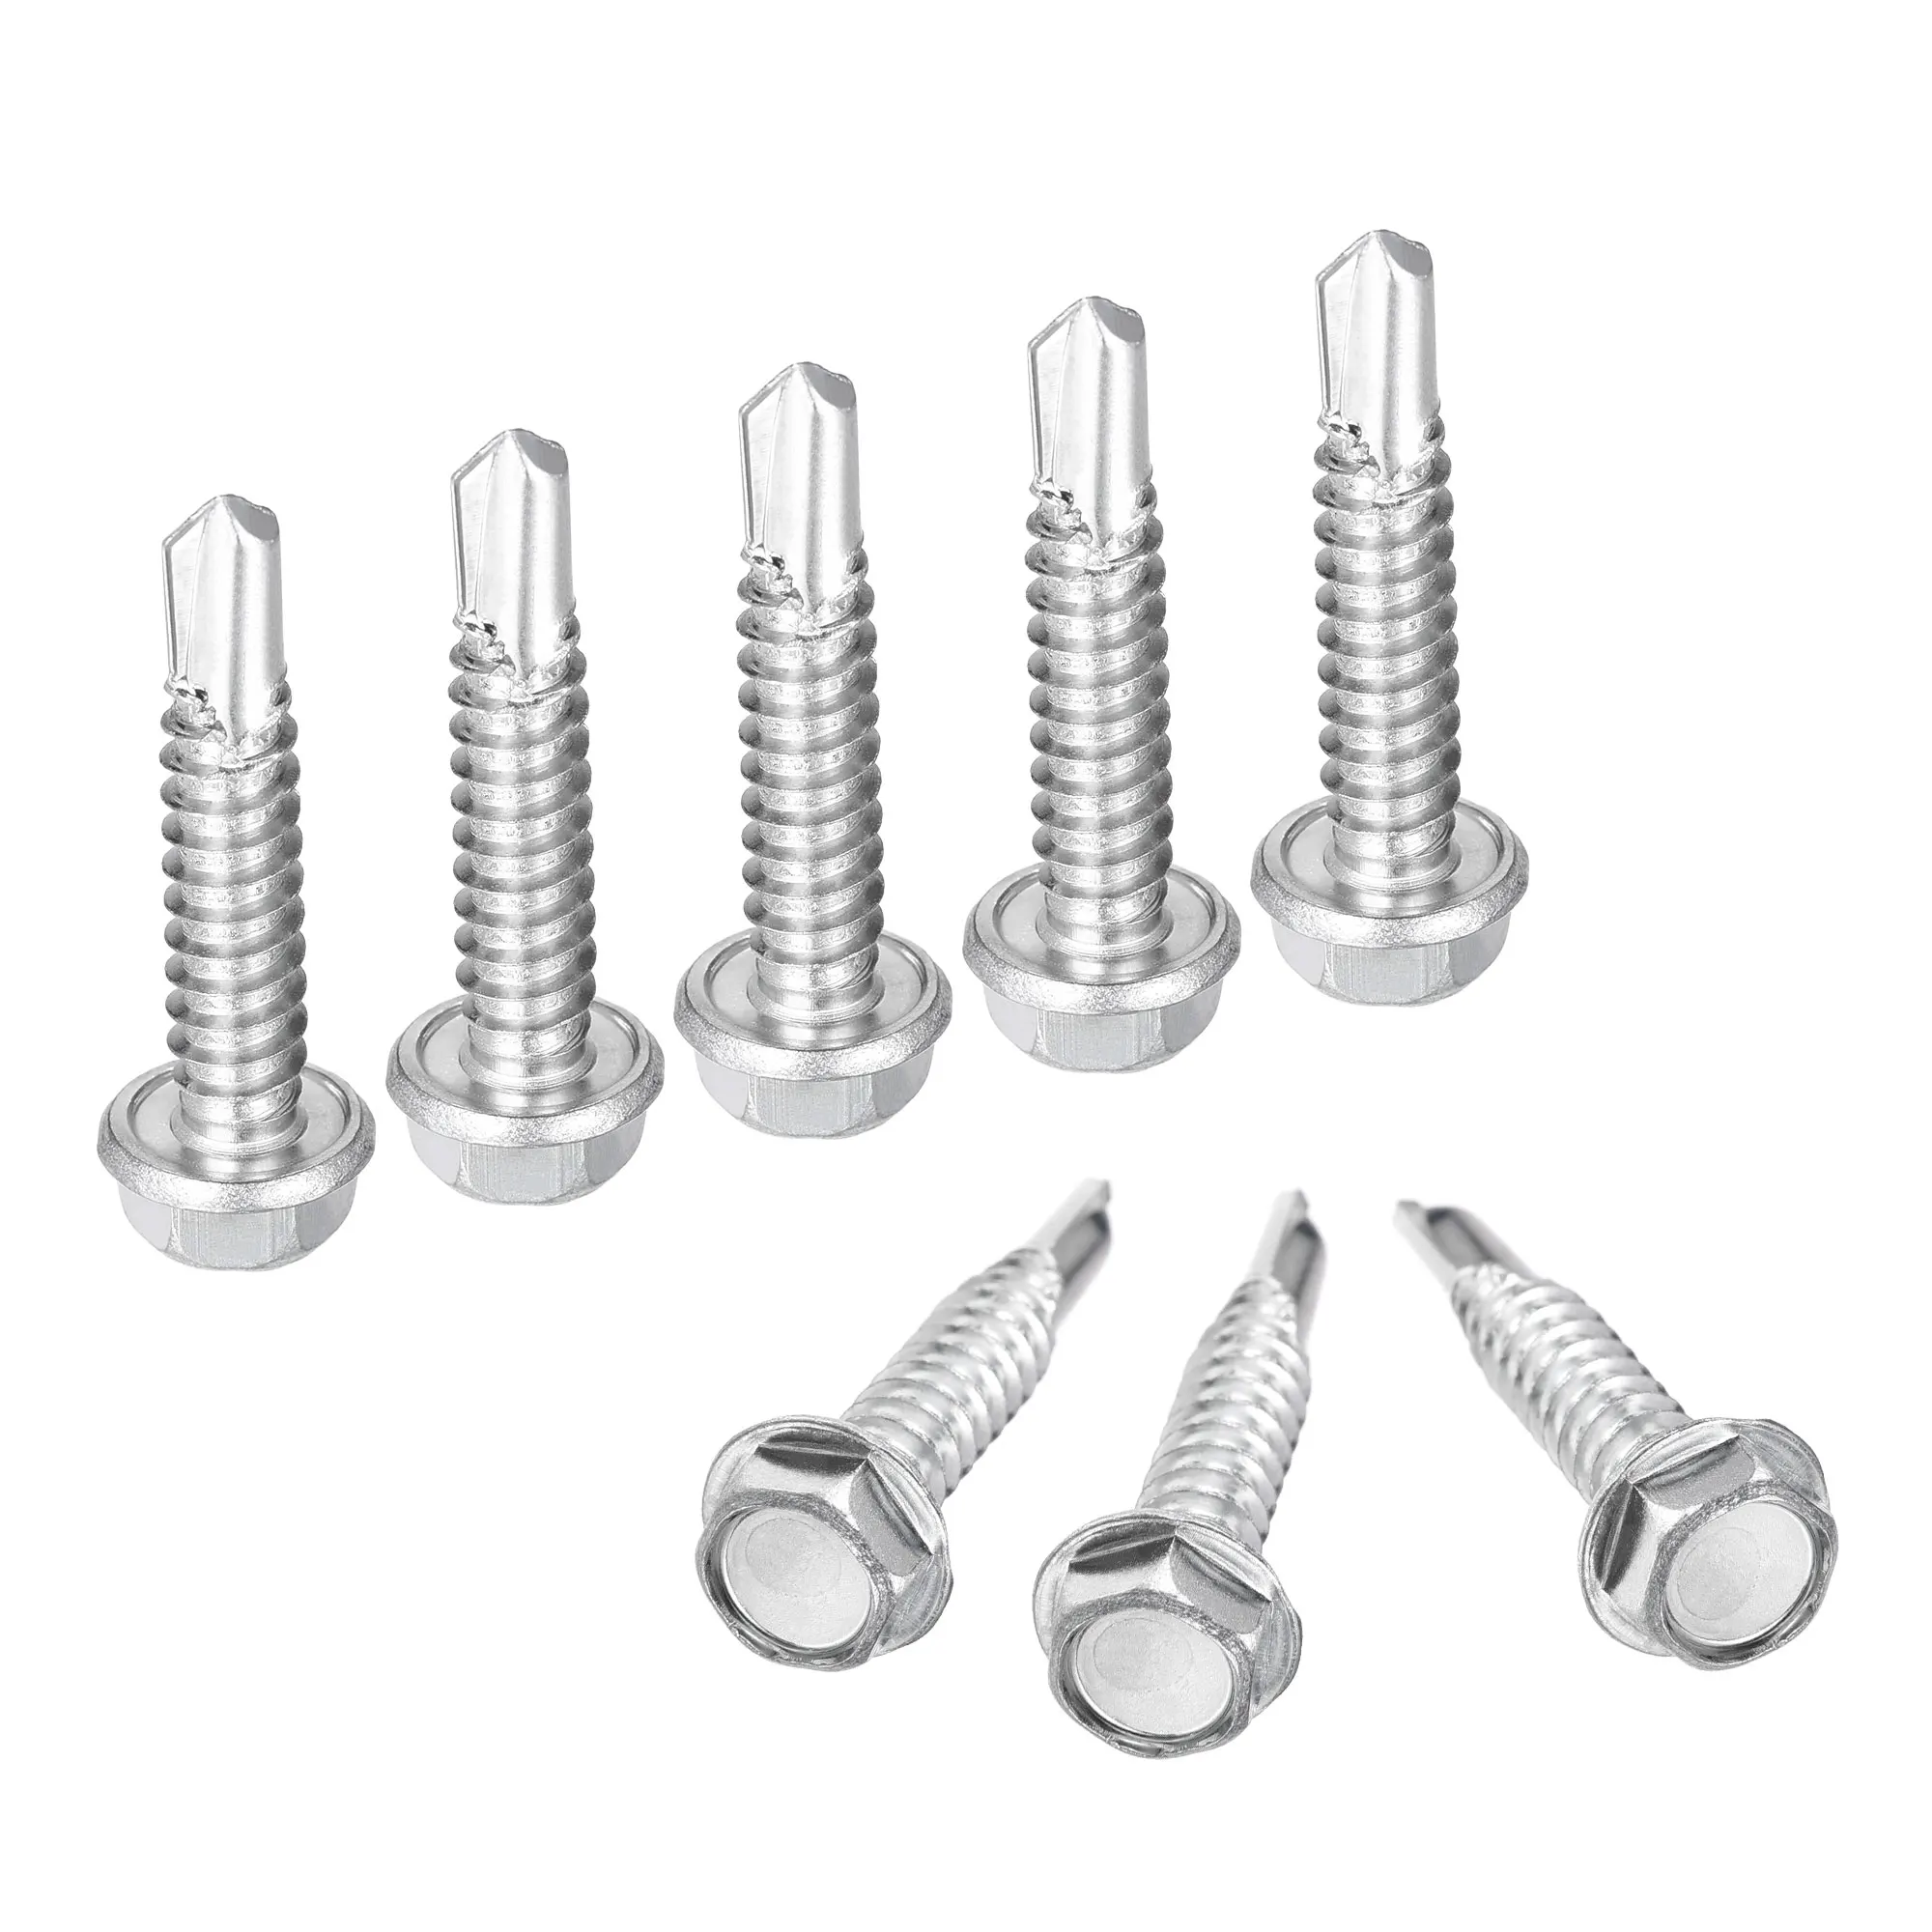 

Uxcell Hex Washer Self Drilling Screws, 1/4 x 1-1/4" Carbon Steel Hex Flange Sheet Metal Tapping Screw 50pcs